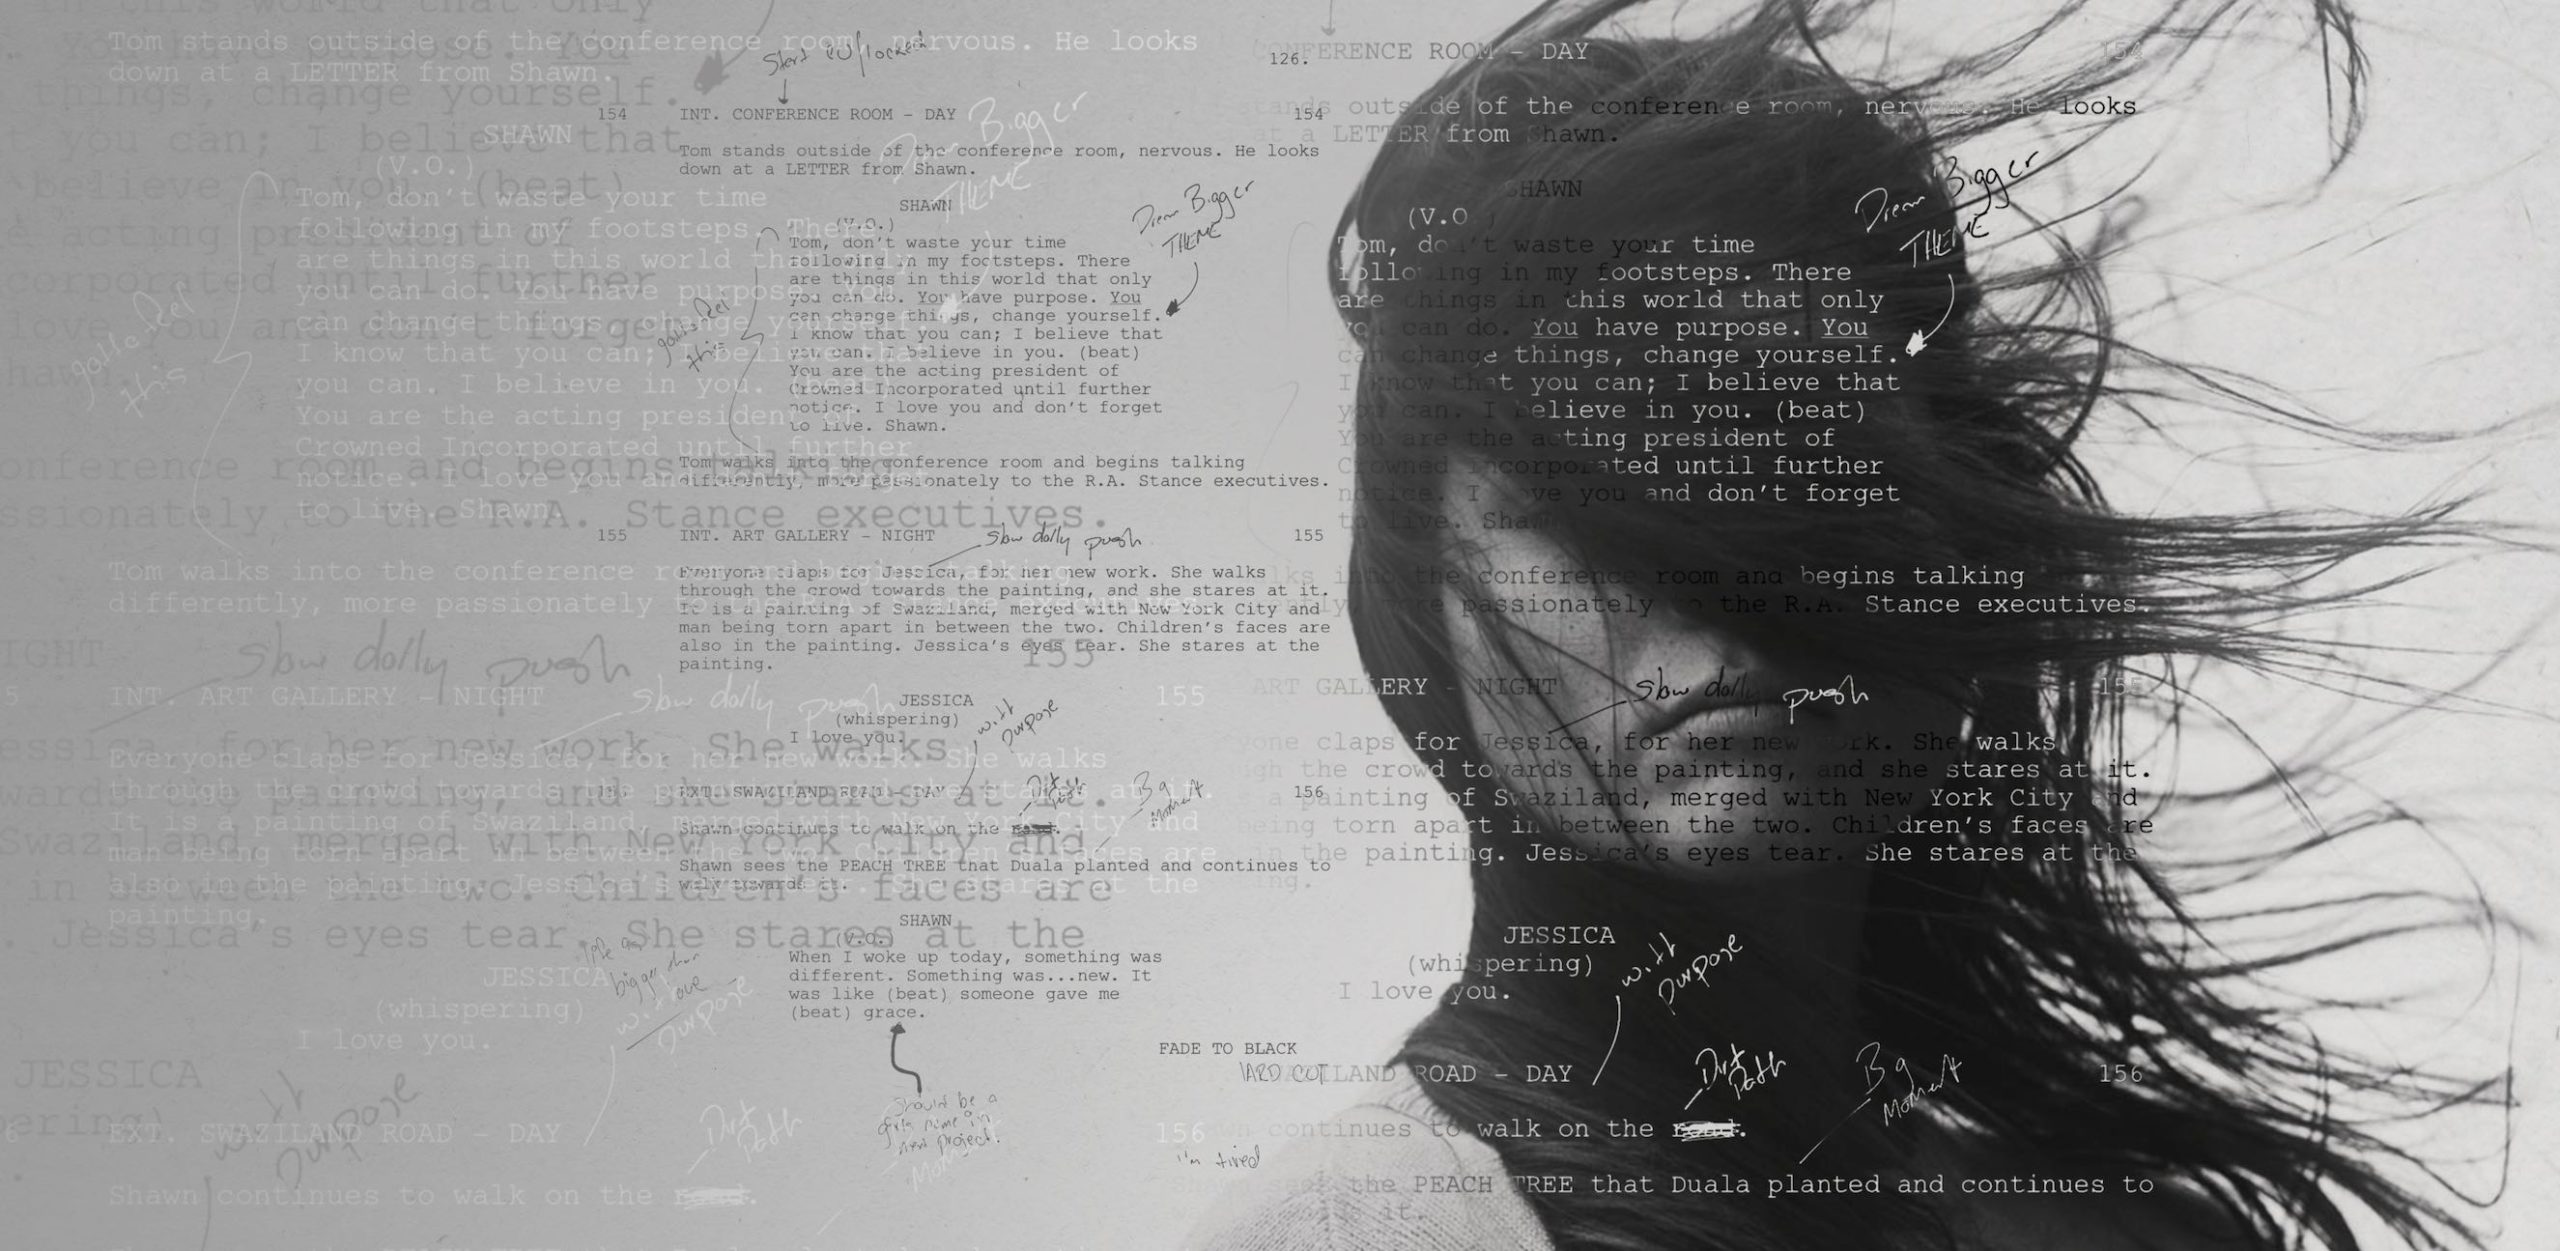 Original Productions Black and white screenshot of woman with long hair in her face and script